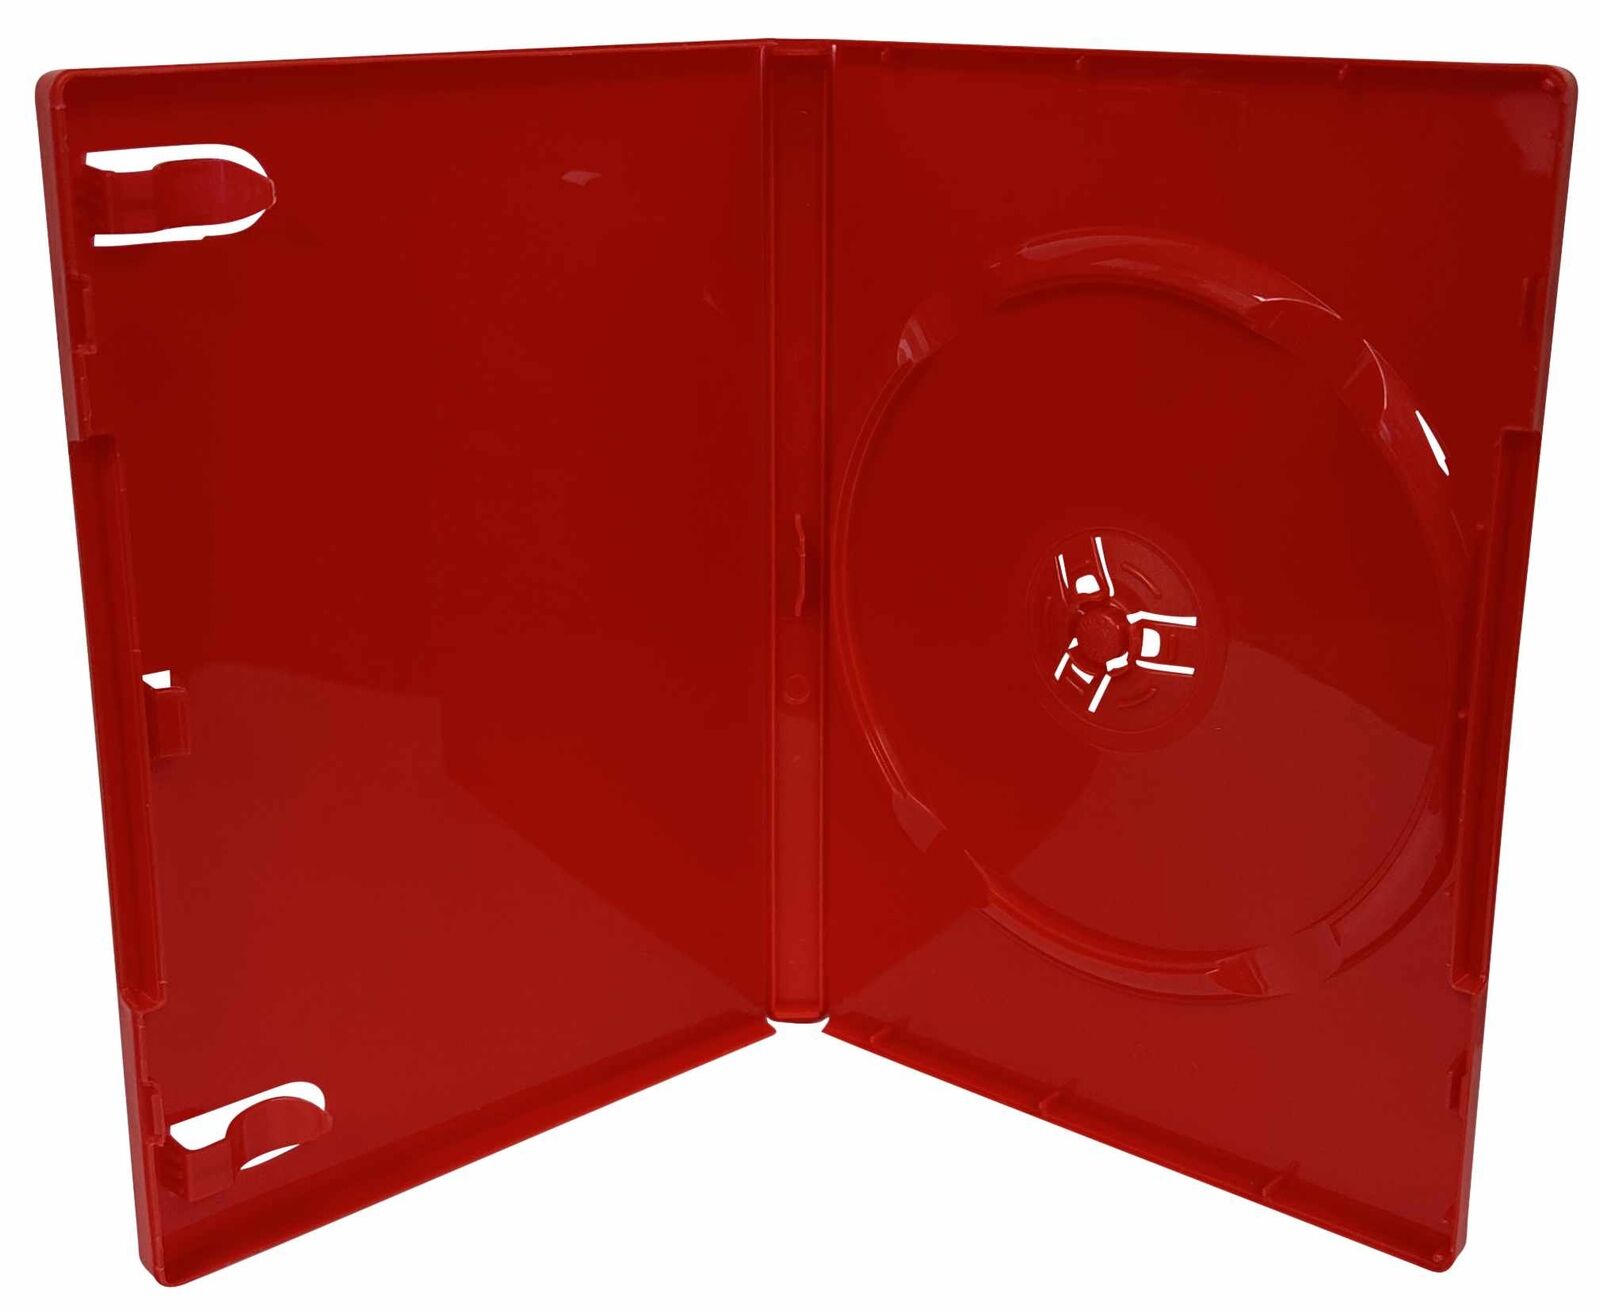 STANDARD Solid Glossy Red Color Single DVD Cases Lot